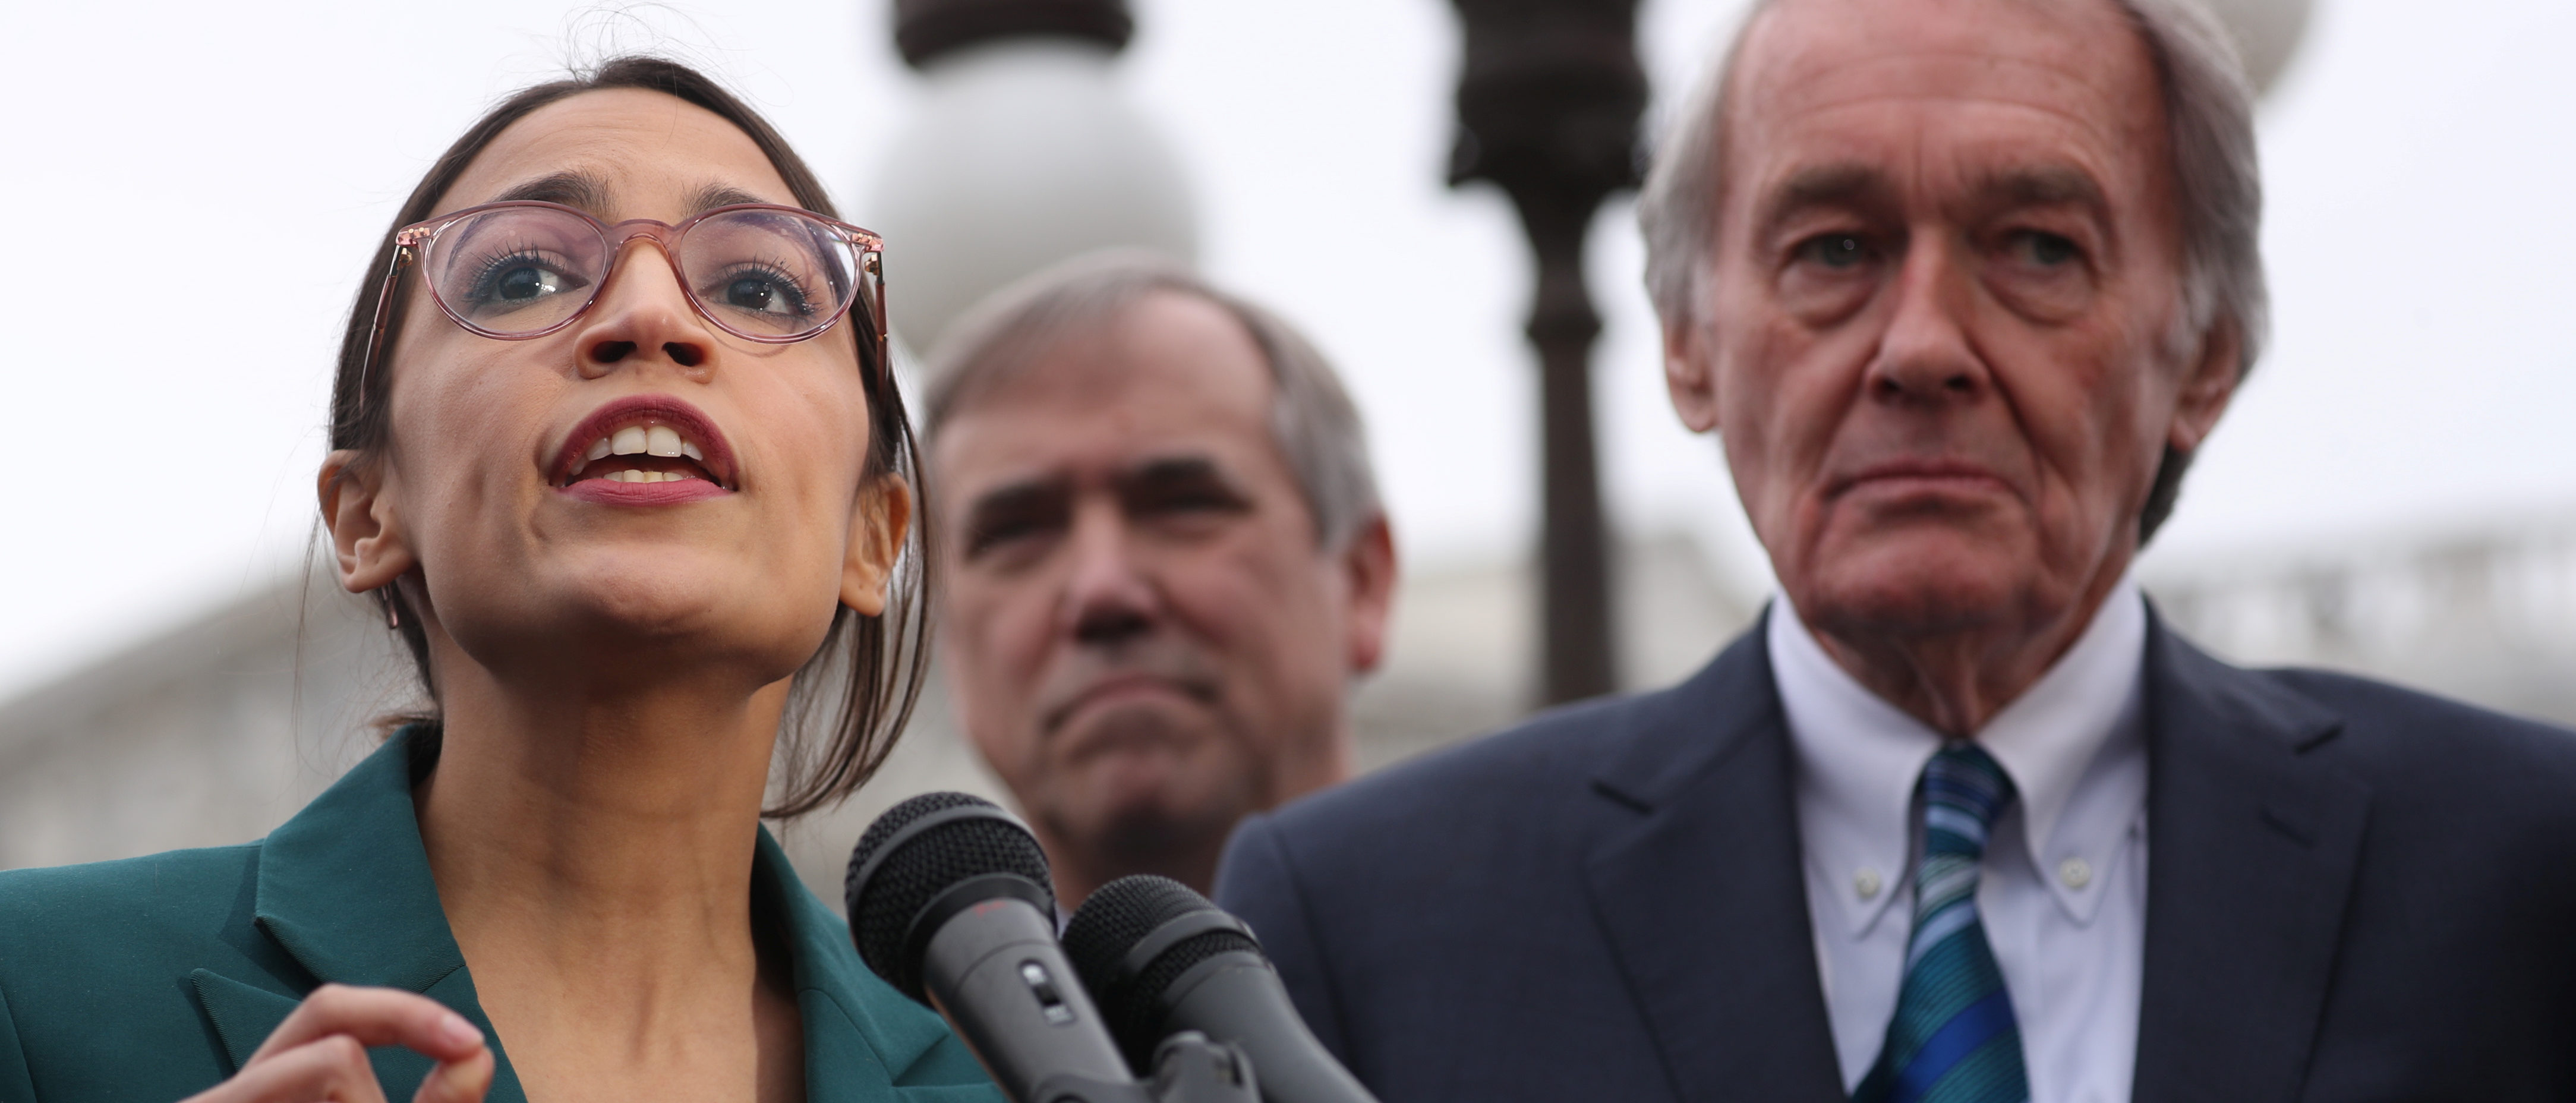 U.S. Representative Alexandria Ocasio-Cortez (D-NY) and Senator Ed Markey (D-MA) hold a news conference for their proposed "Green New Deal" to achieve net-zero greenhouse gas emissions in 10 years, at the U.S. Capitol in Washington, U.S. February 7, 2019. REUTERS/Jonathan Ernst.